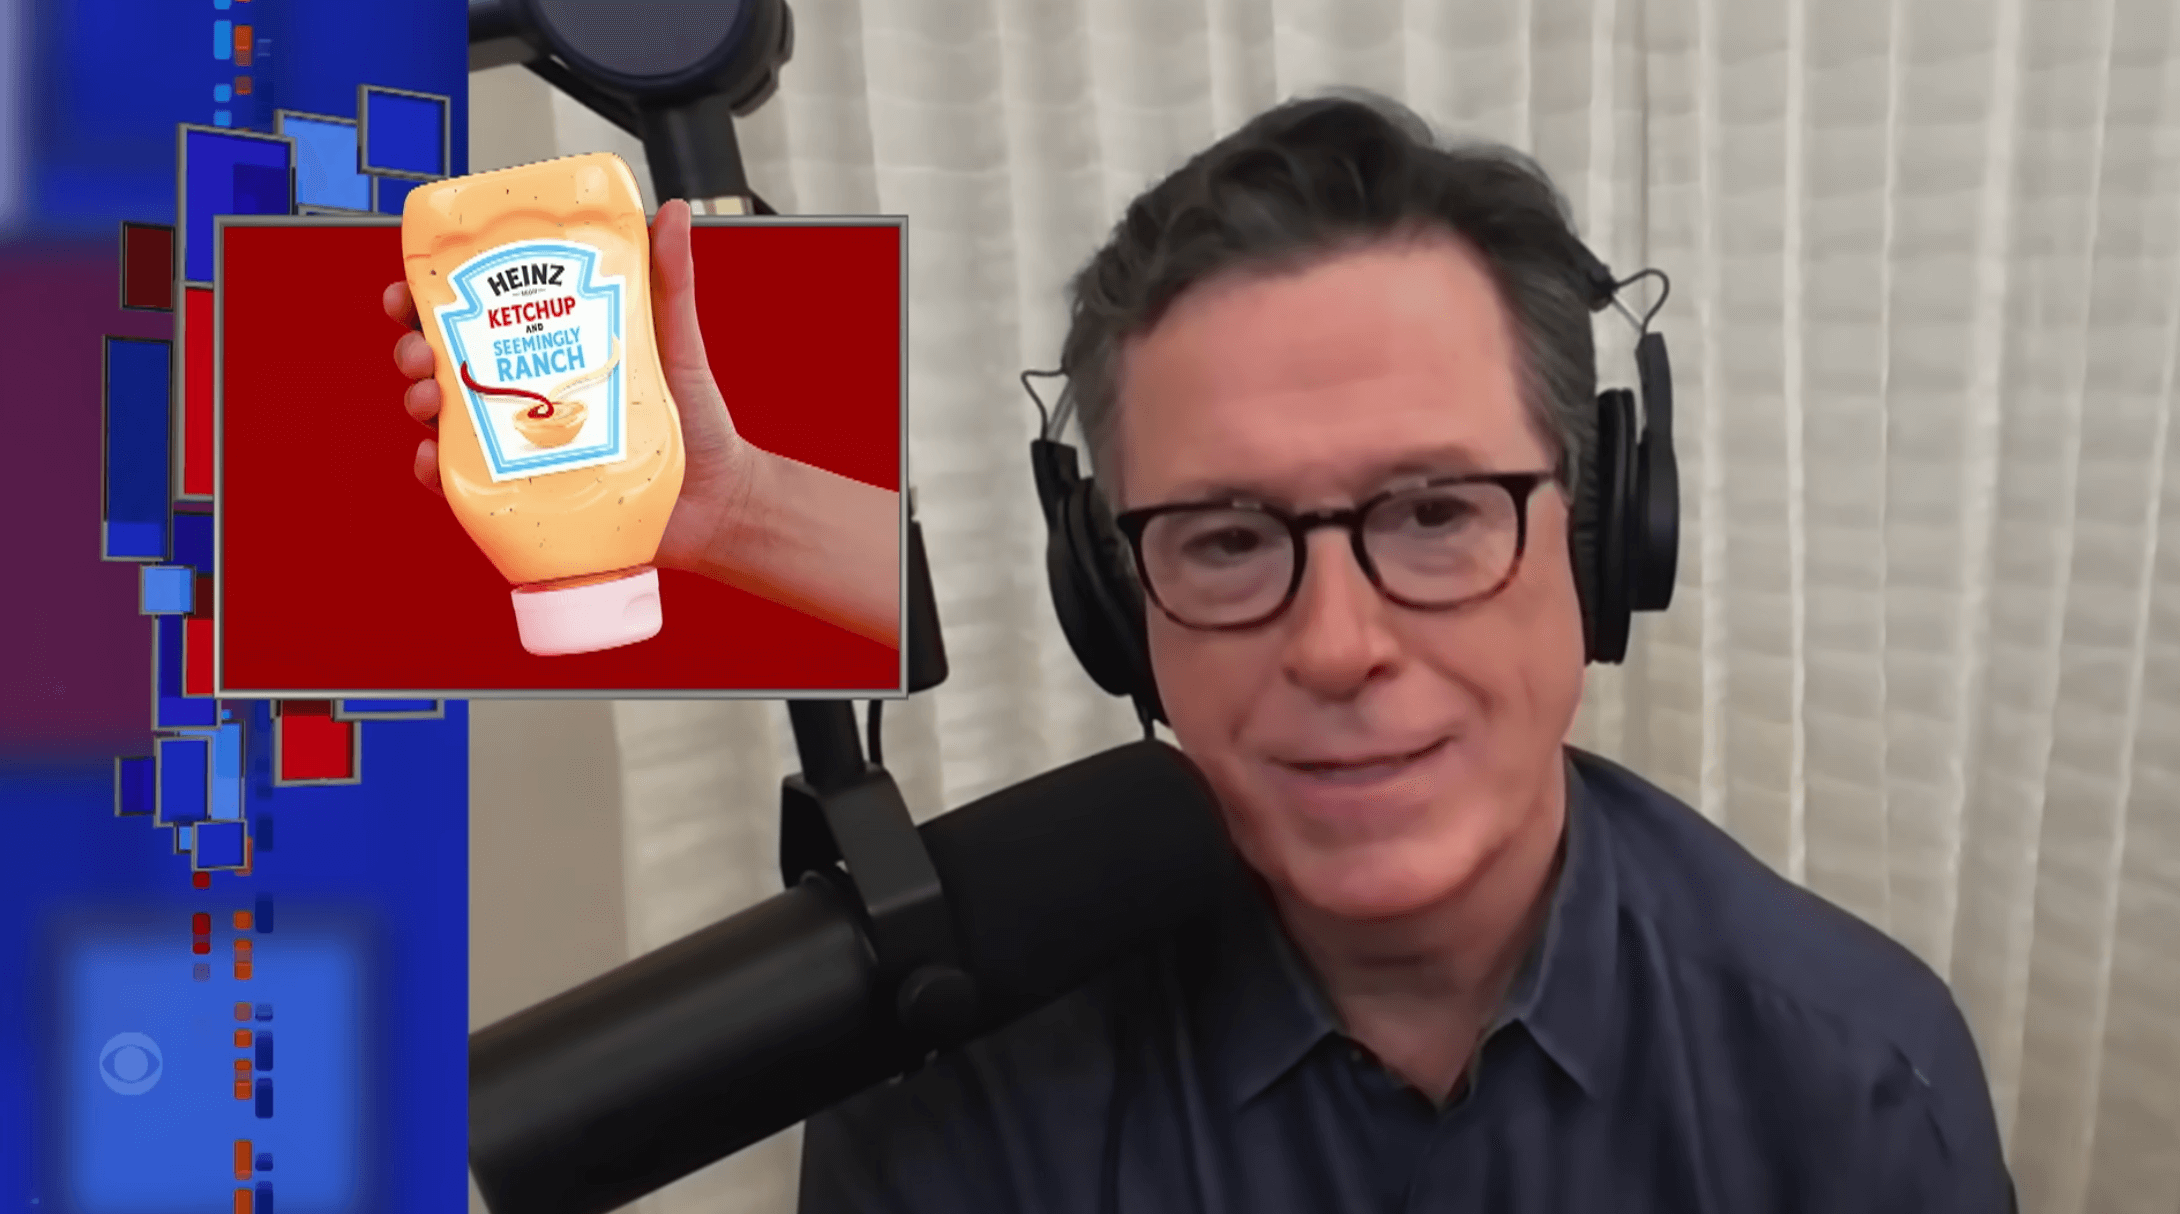 Heinz Ketchup Seemingly Ranch S_Late Show Stephen Colbert